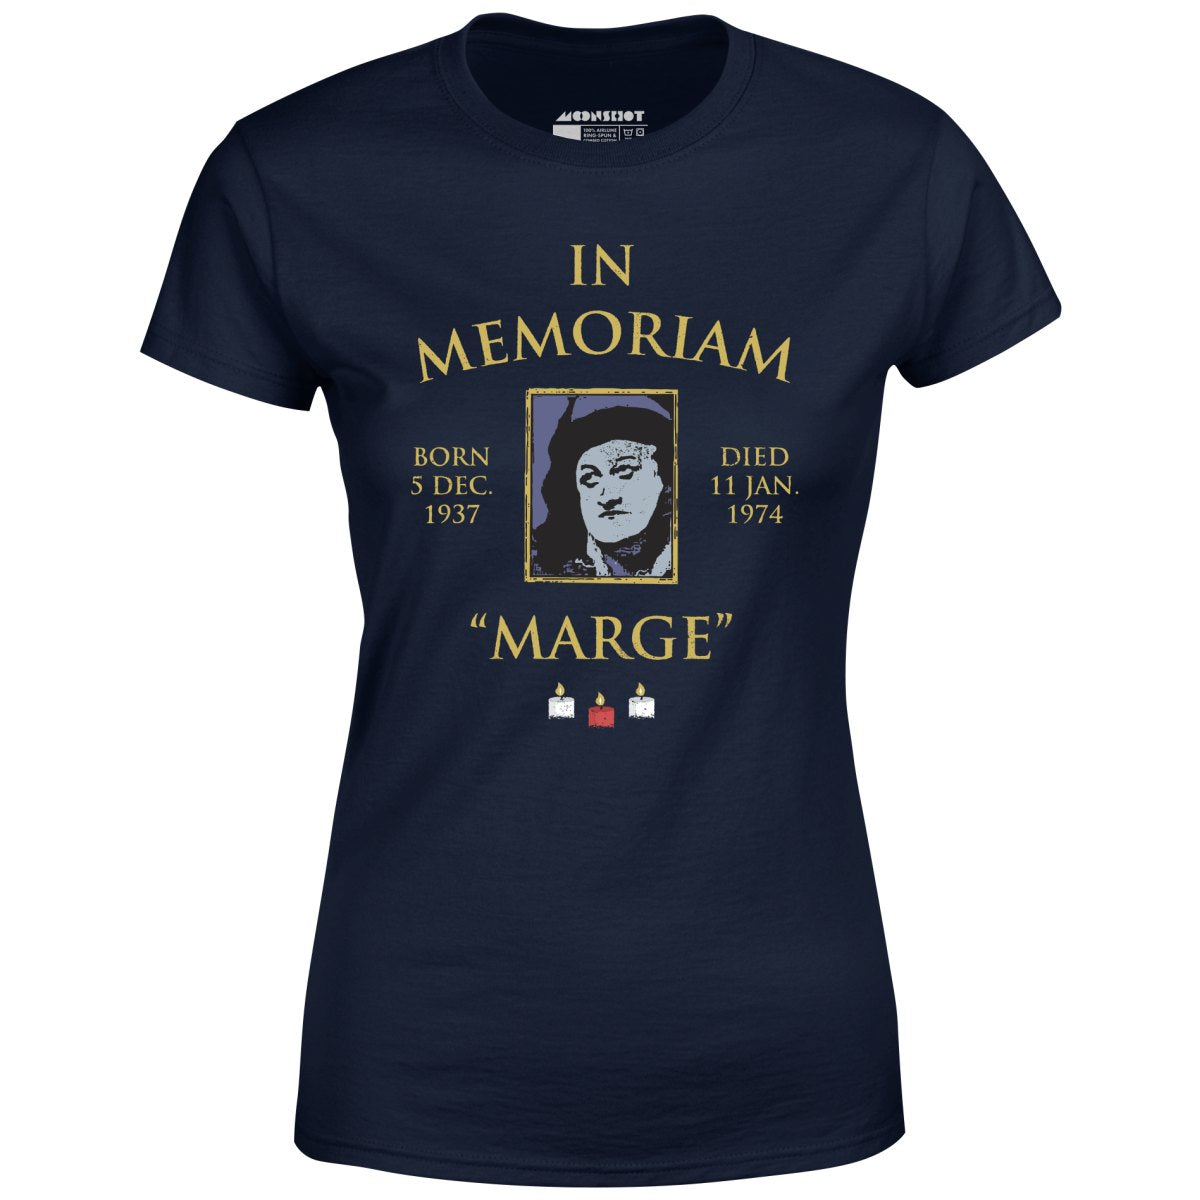 Large Marge in Memoriam - Women's T-Shirt